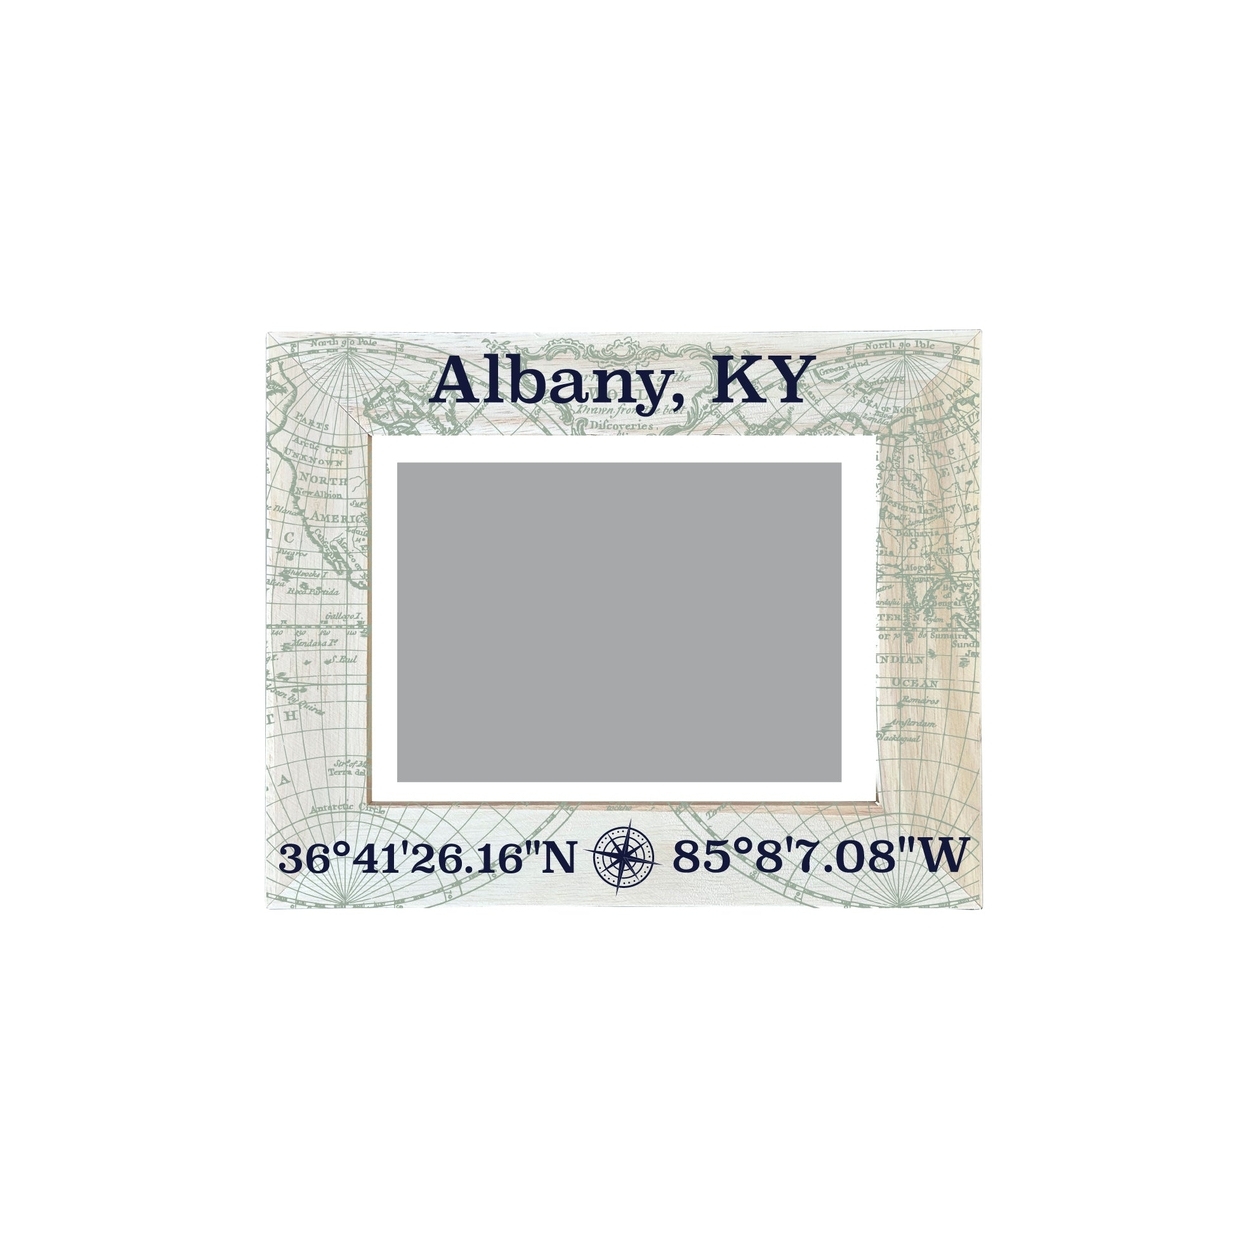 Albany Kentucky Souvenir Wooden Photo Frame Compass Coordinates Design Matted To 4 X 6